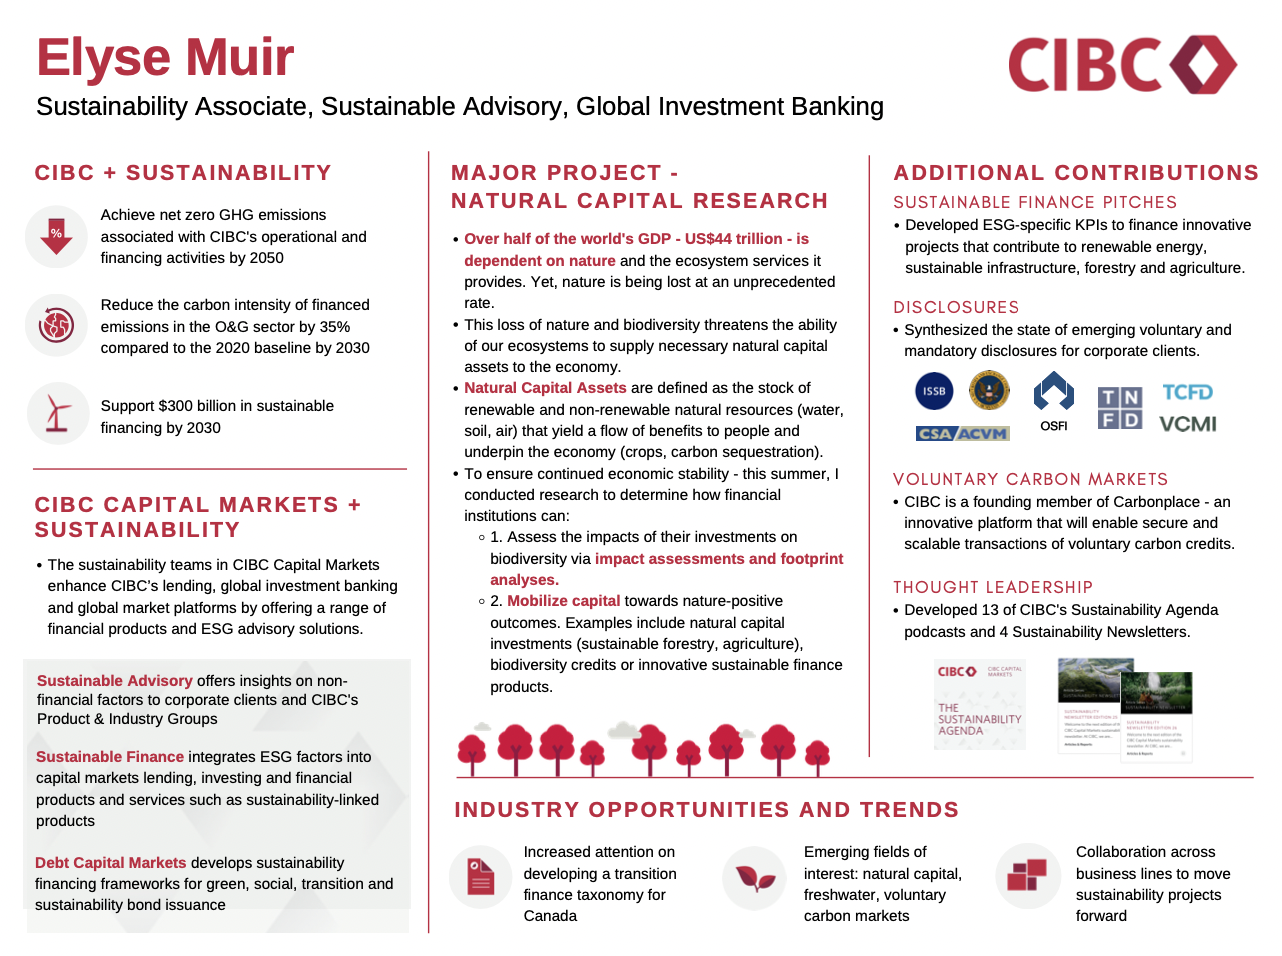 Showcase Image for Sustainability Associate in CIBC Capital Markets